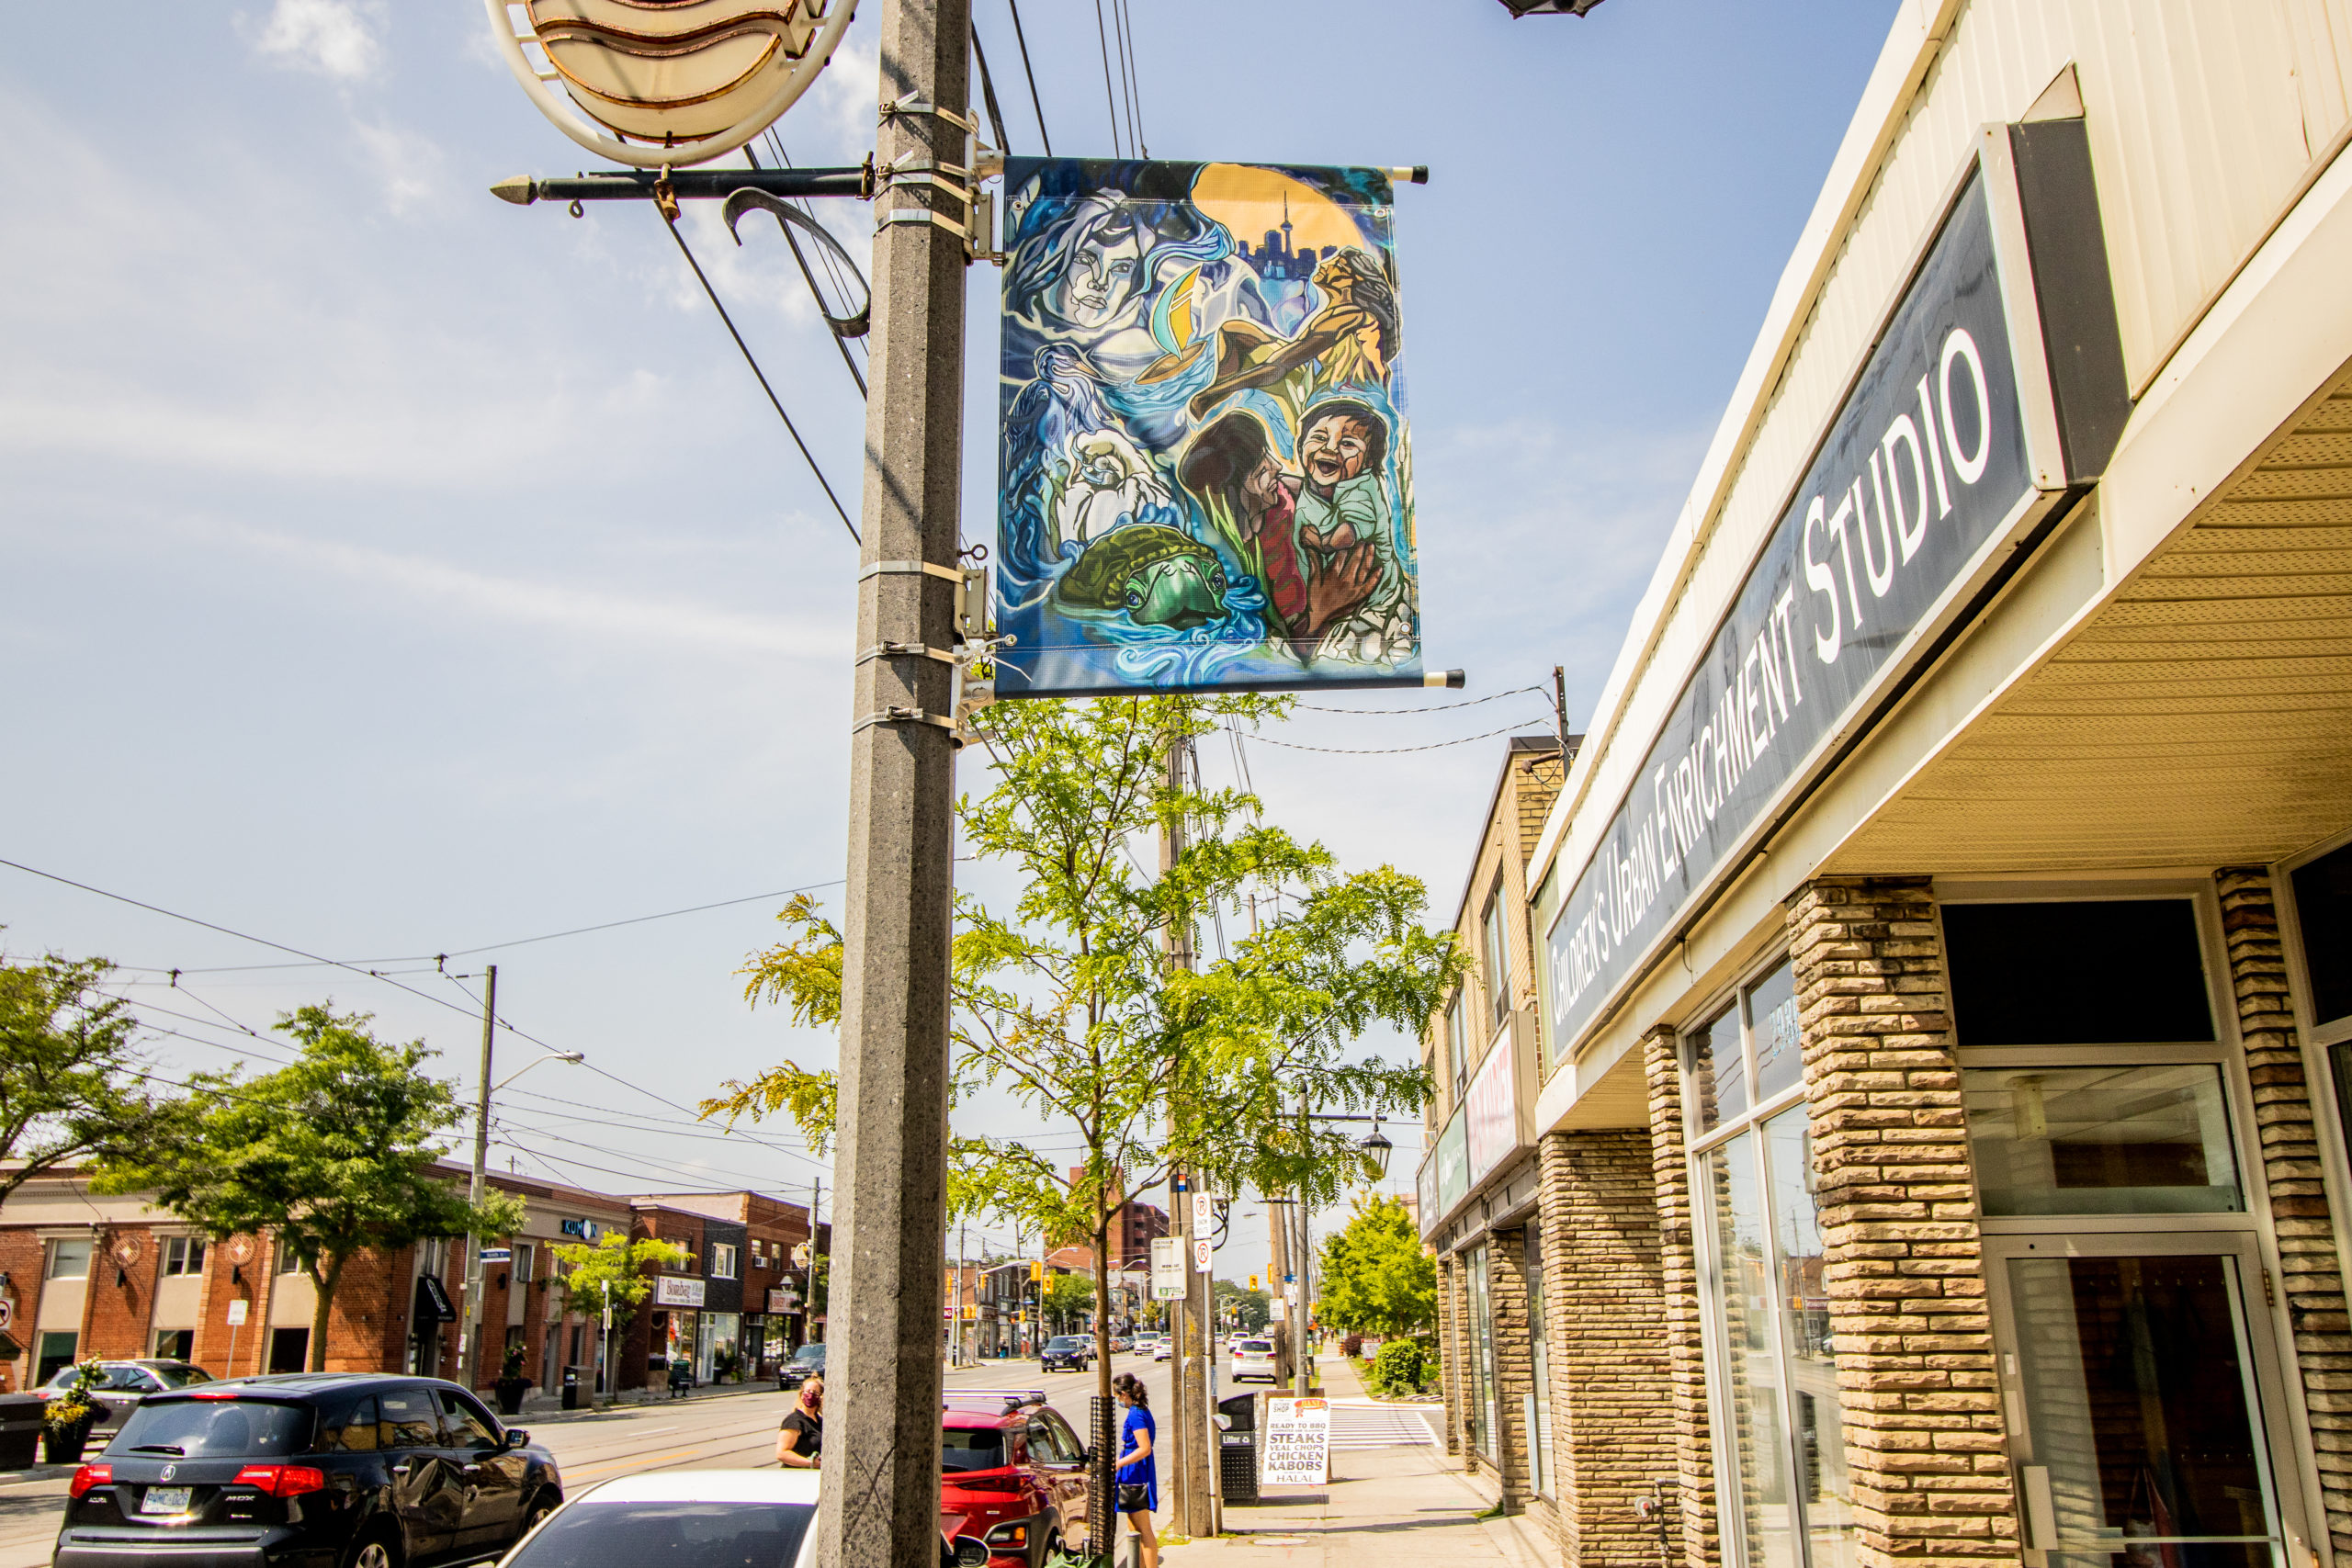 A street pole banner artwork by artist Danielle Hyde on a sunny day. The artwork is a digital piece with illustrations inspired by Toronto's waterfront with images of the cityscape, families and animals